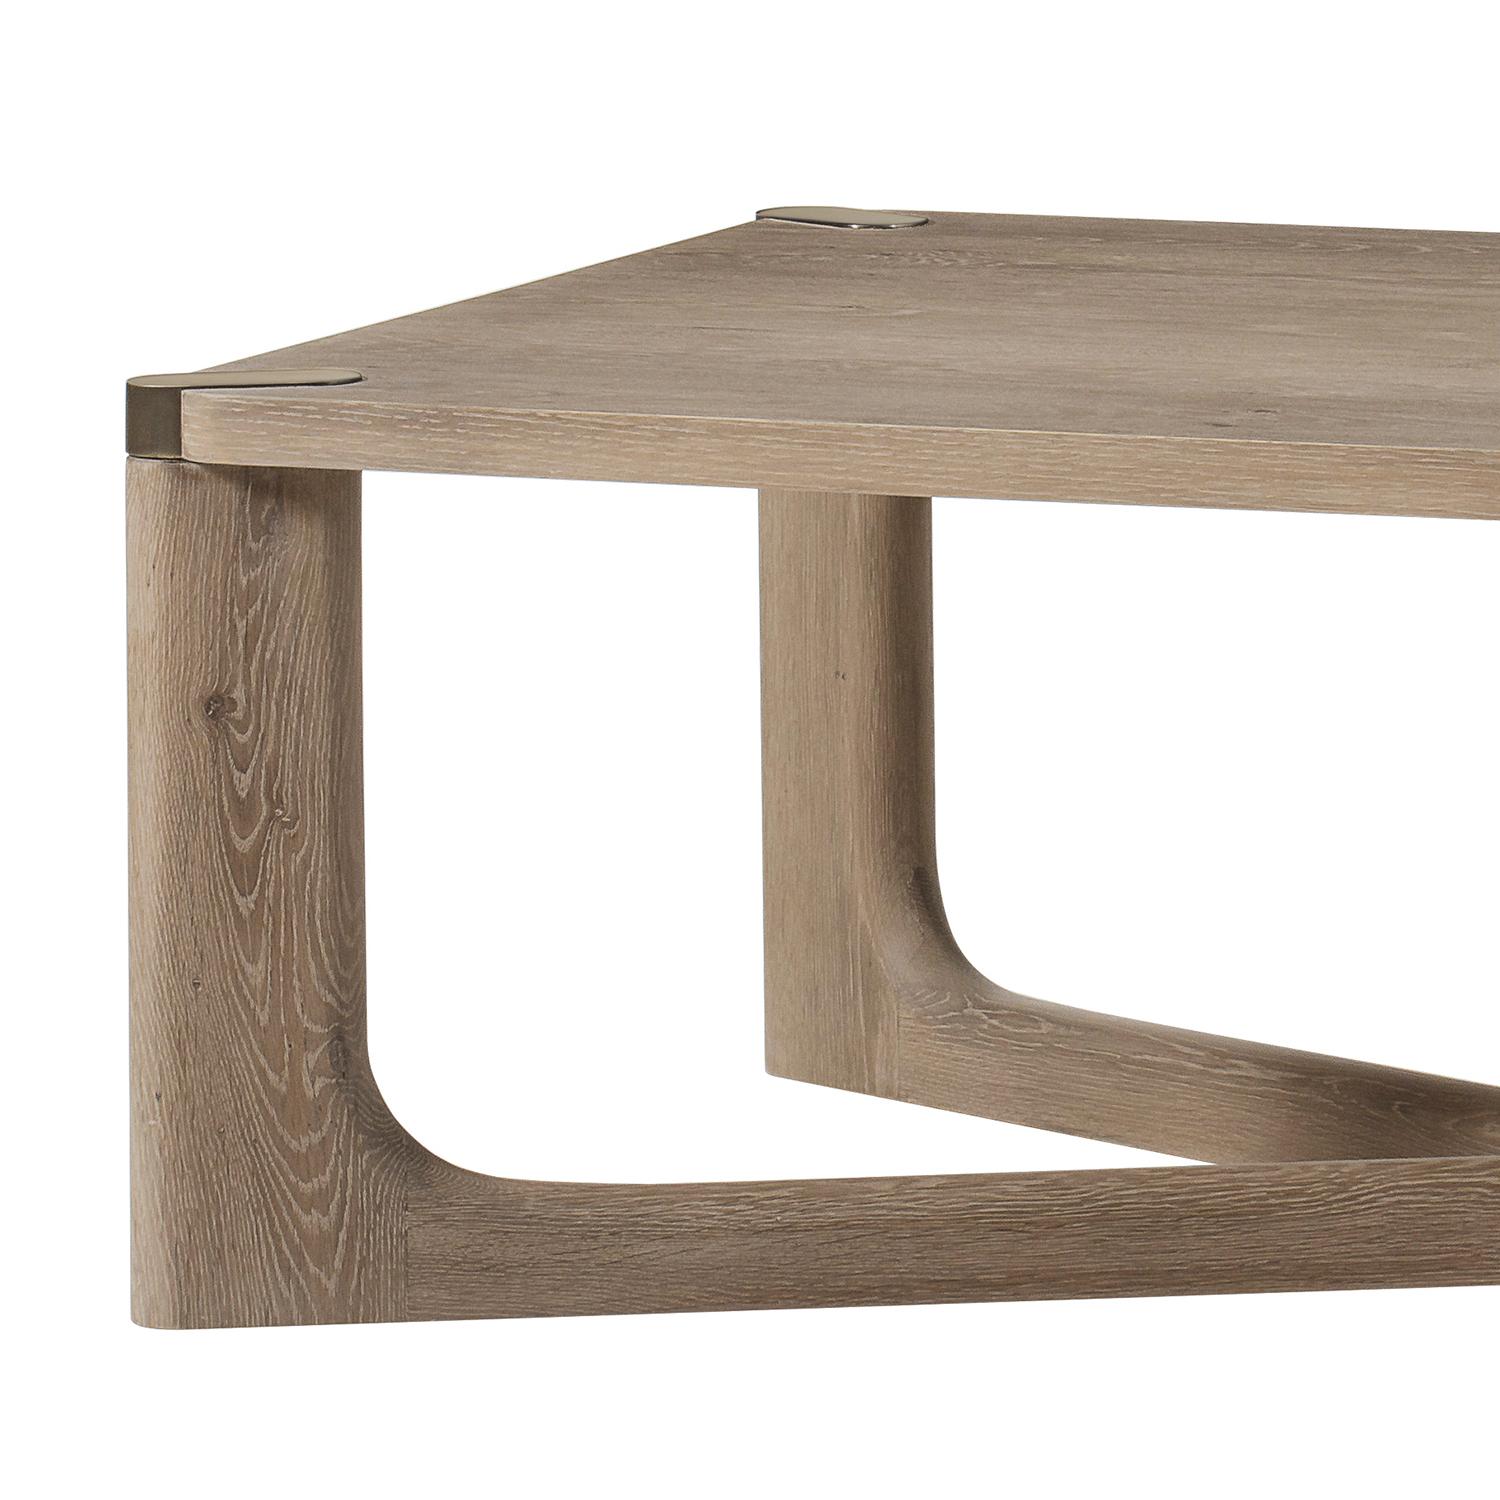 Coffee table Hines with all structure in natural light
oak veneered finish, with brass satinated corners on the top.